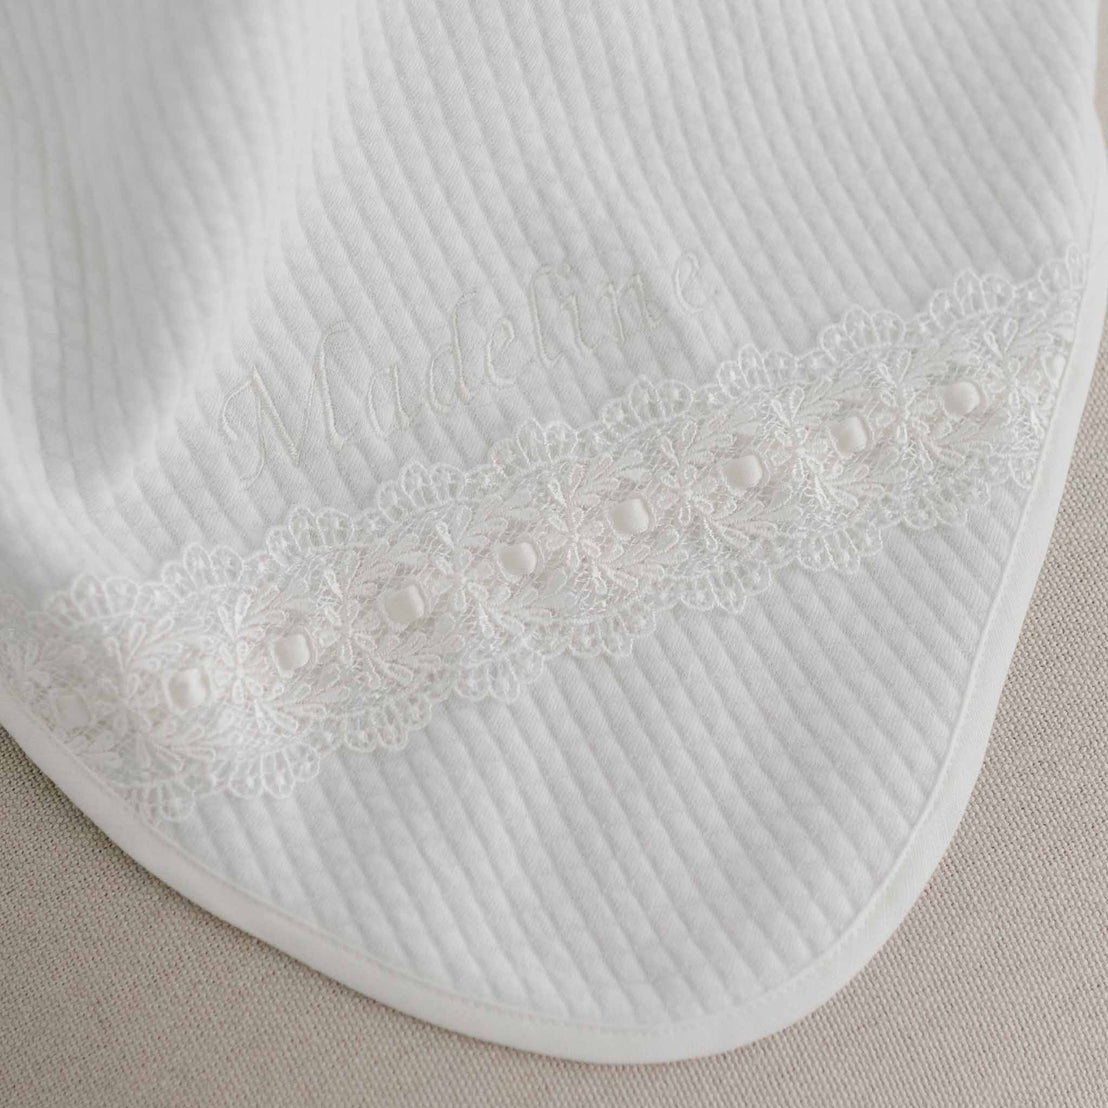 White fabric baby bib with delicate lace detail and pearls, featuring the embroidered name "Madeline" in an elegant script font. 